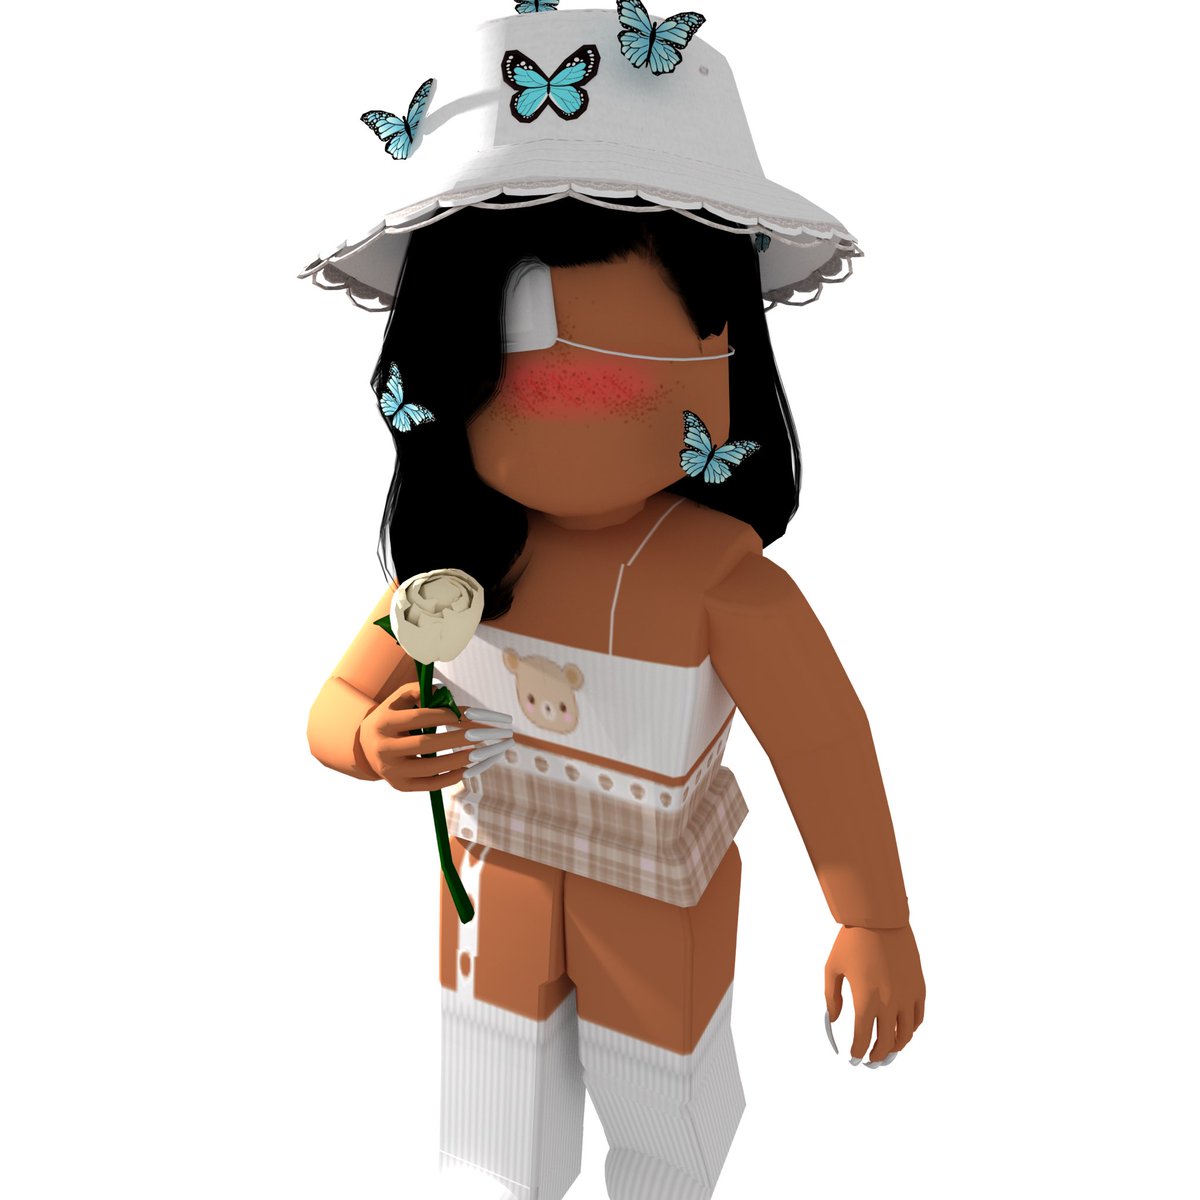 Offline On Twitter I Also Made This Here S A Transparent Gfx You Can Use For Edits And Such Just Please Give Credit Robloxart Roblox Robloxdesigner Robloxgfx Robloxdev Https T Co Jdcphpdtmi - transparent gfx girl roblox